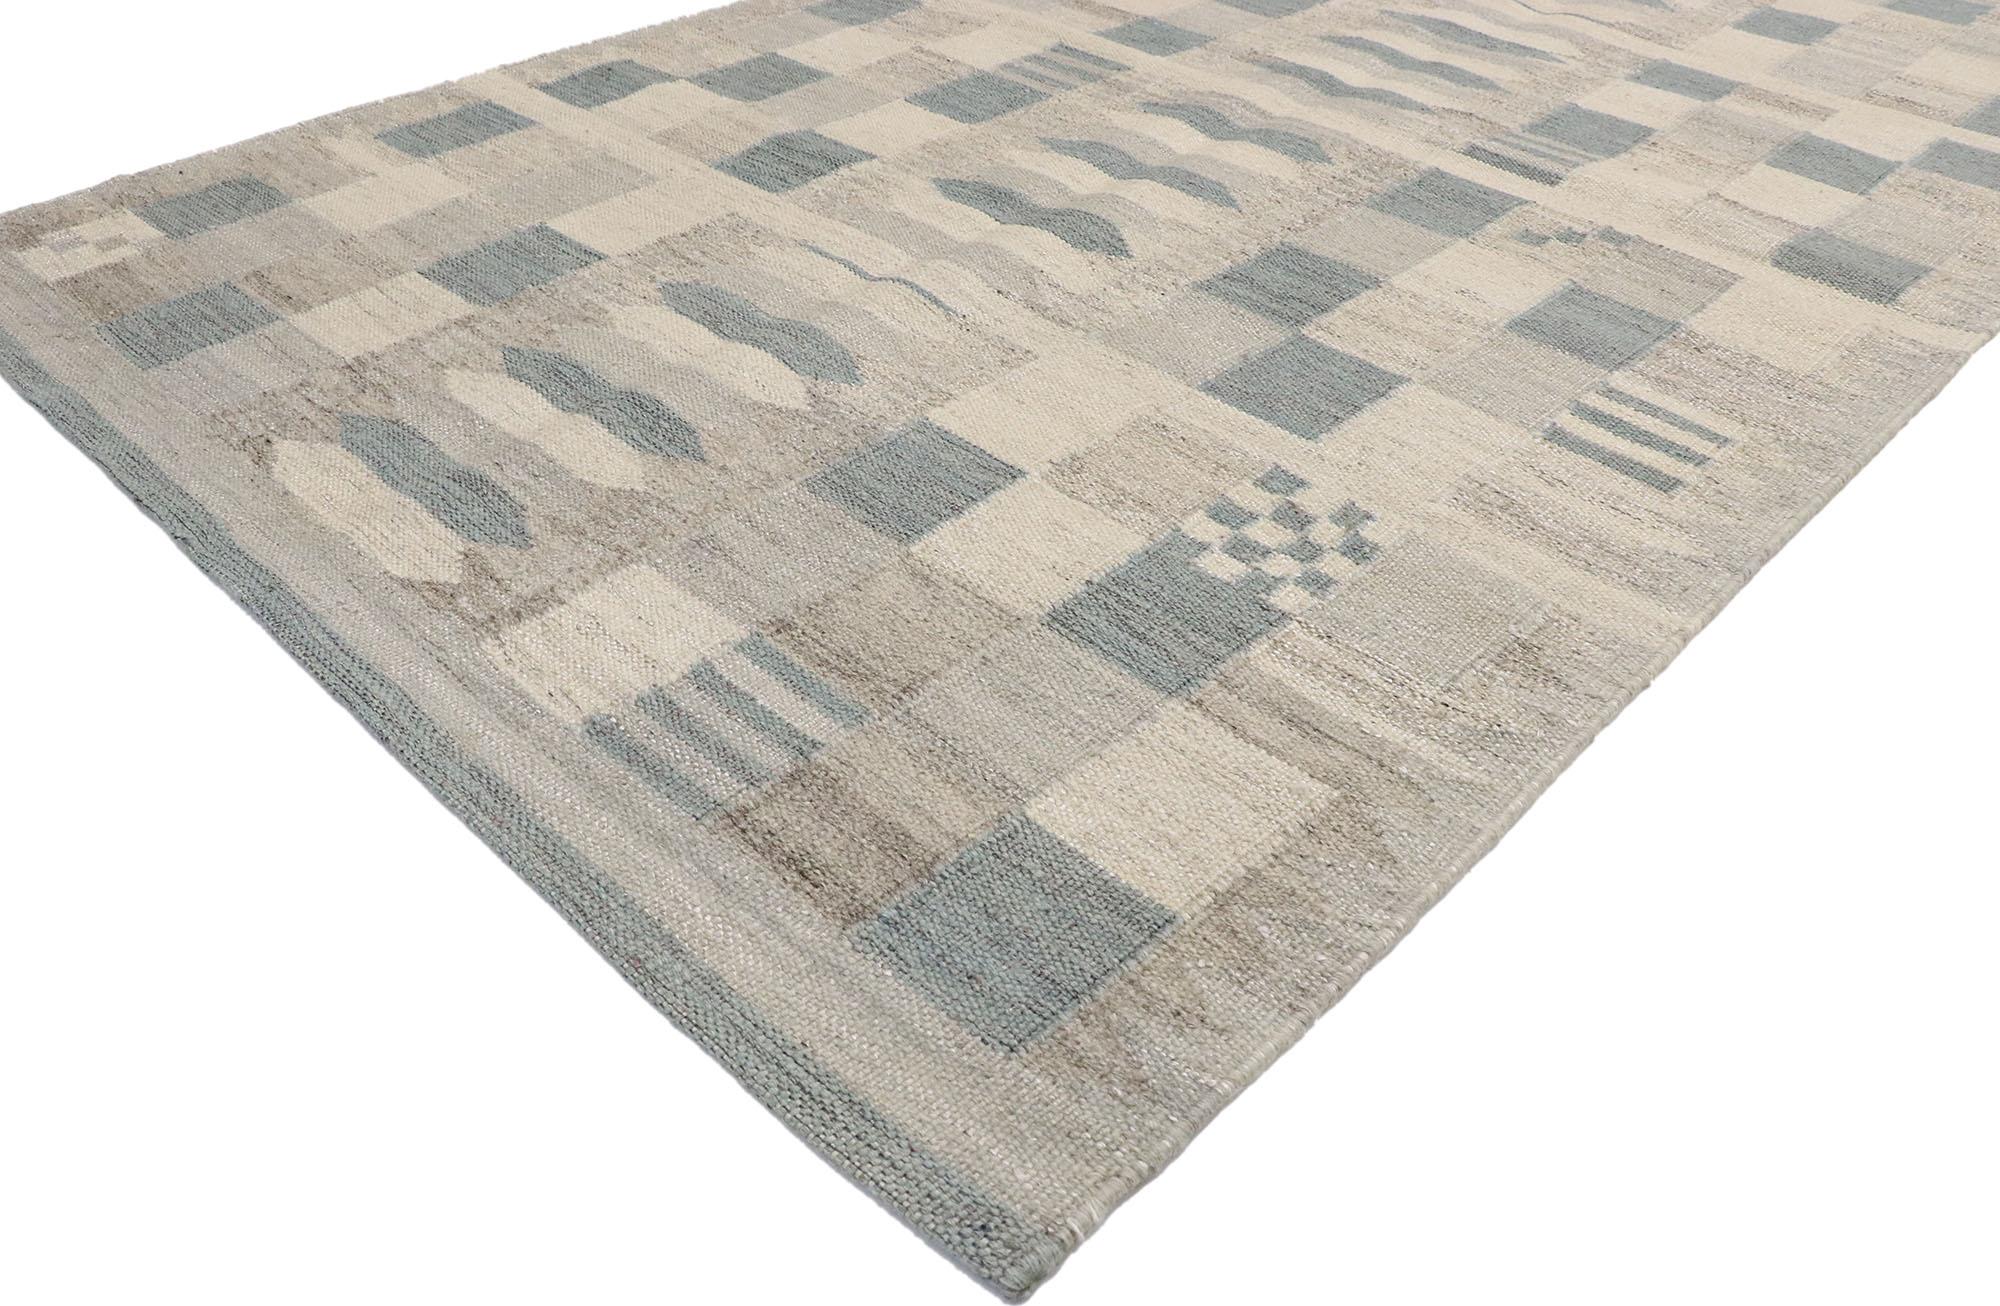 Indian New Contemporary Swedish Inspired Kilim Rug with Scandinavian Modern Style For Sale